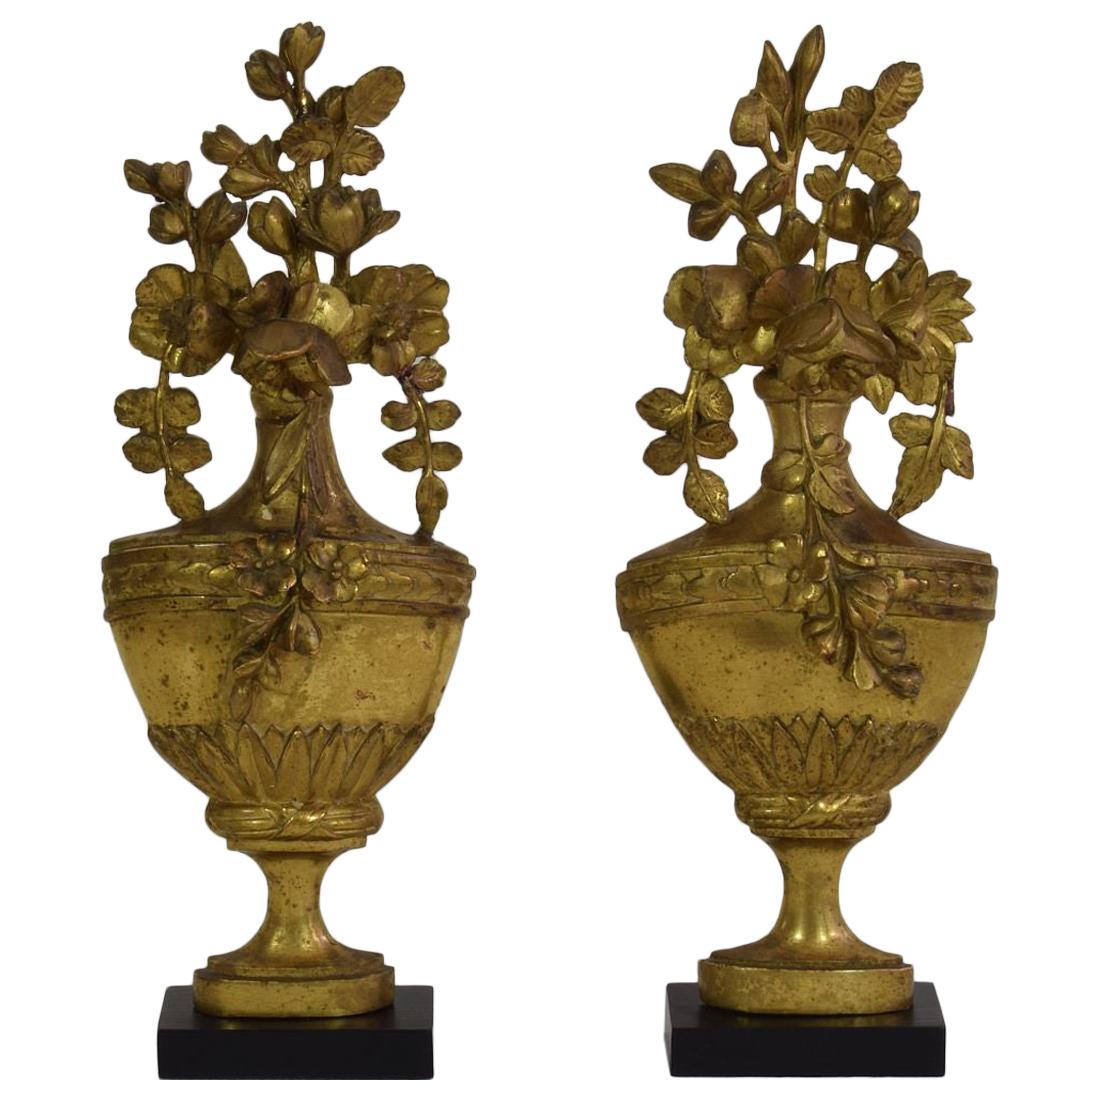 Pair of Small 18-19th Century French Carved Giltwood Neoclassical Vase Ornaments